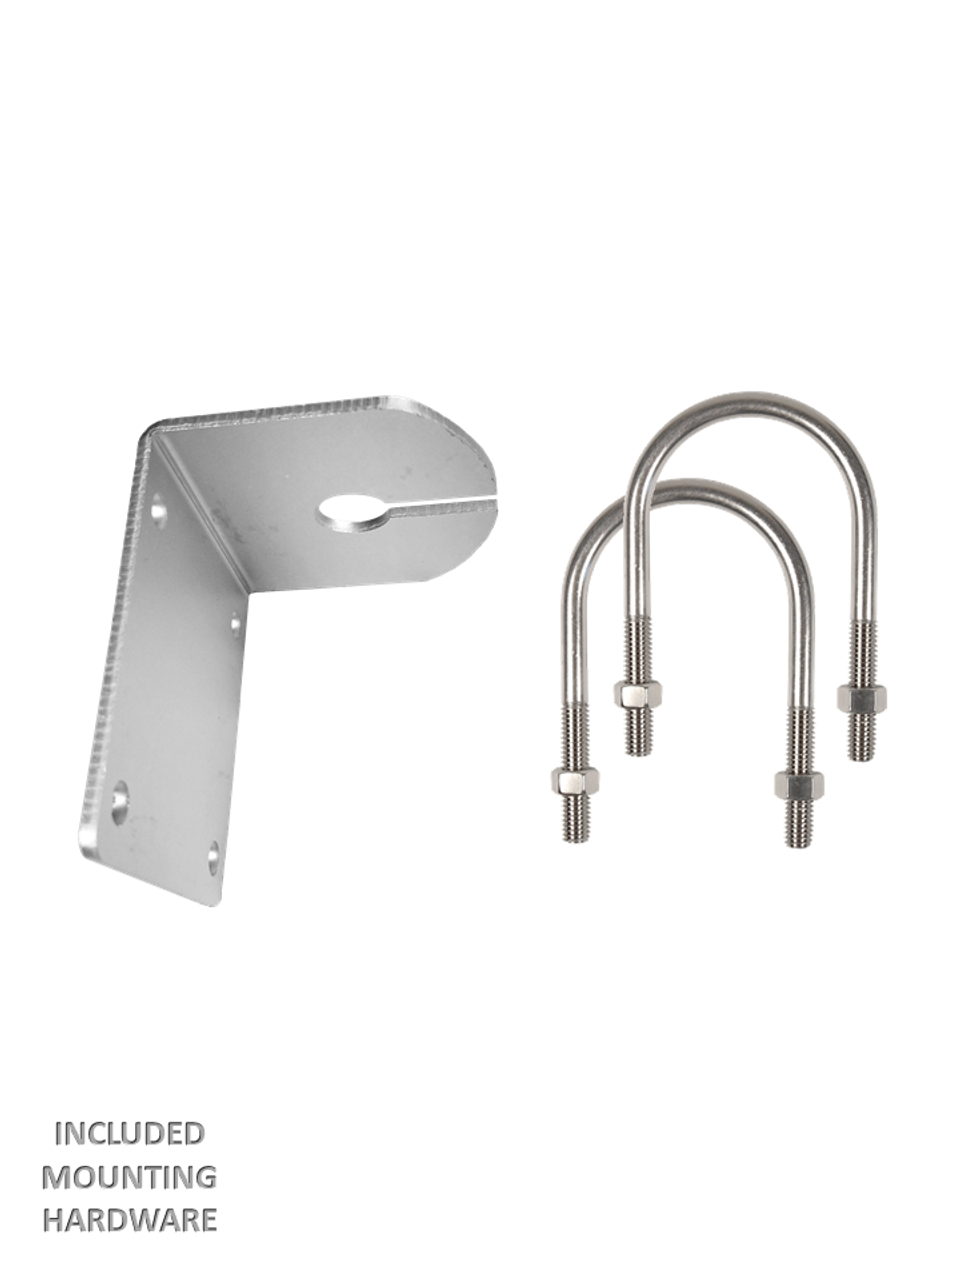 Stainless Steel L-Bracket Mount Hardware Included